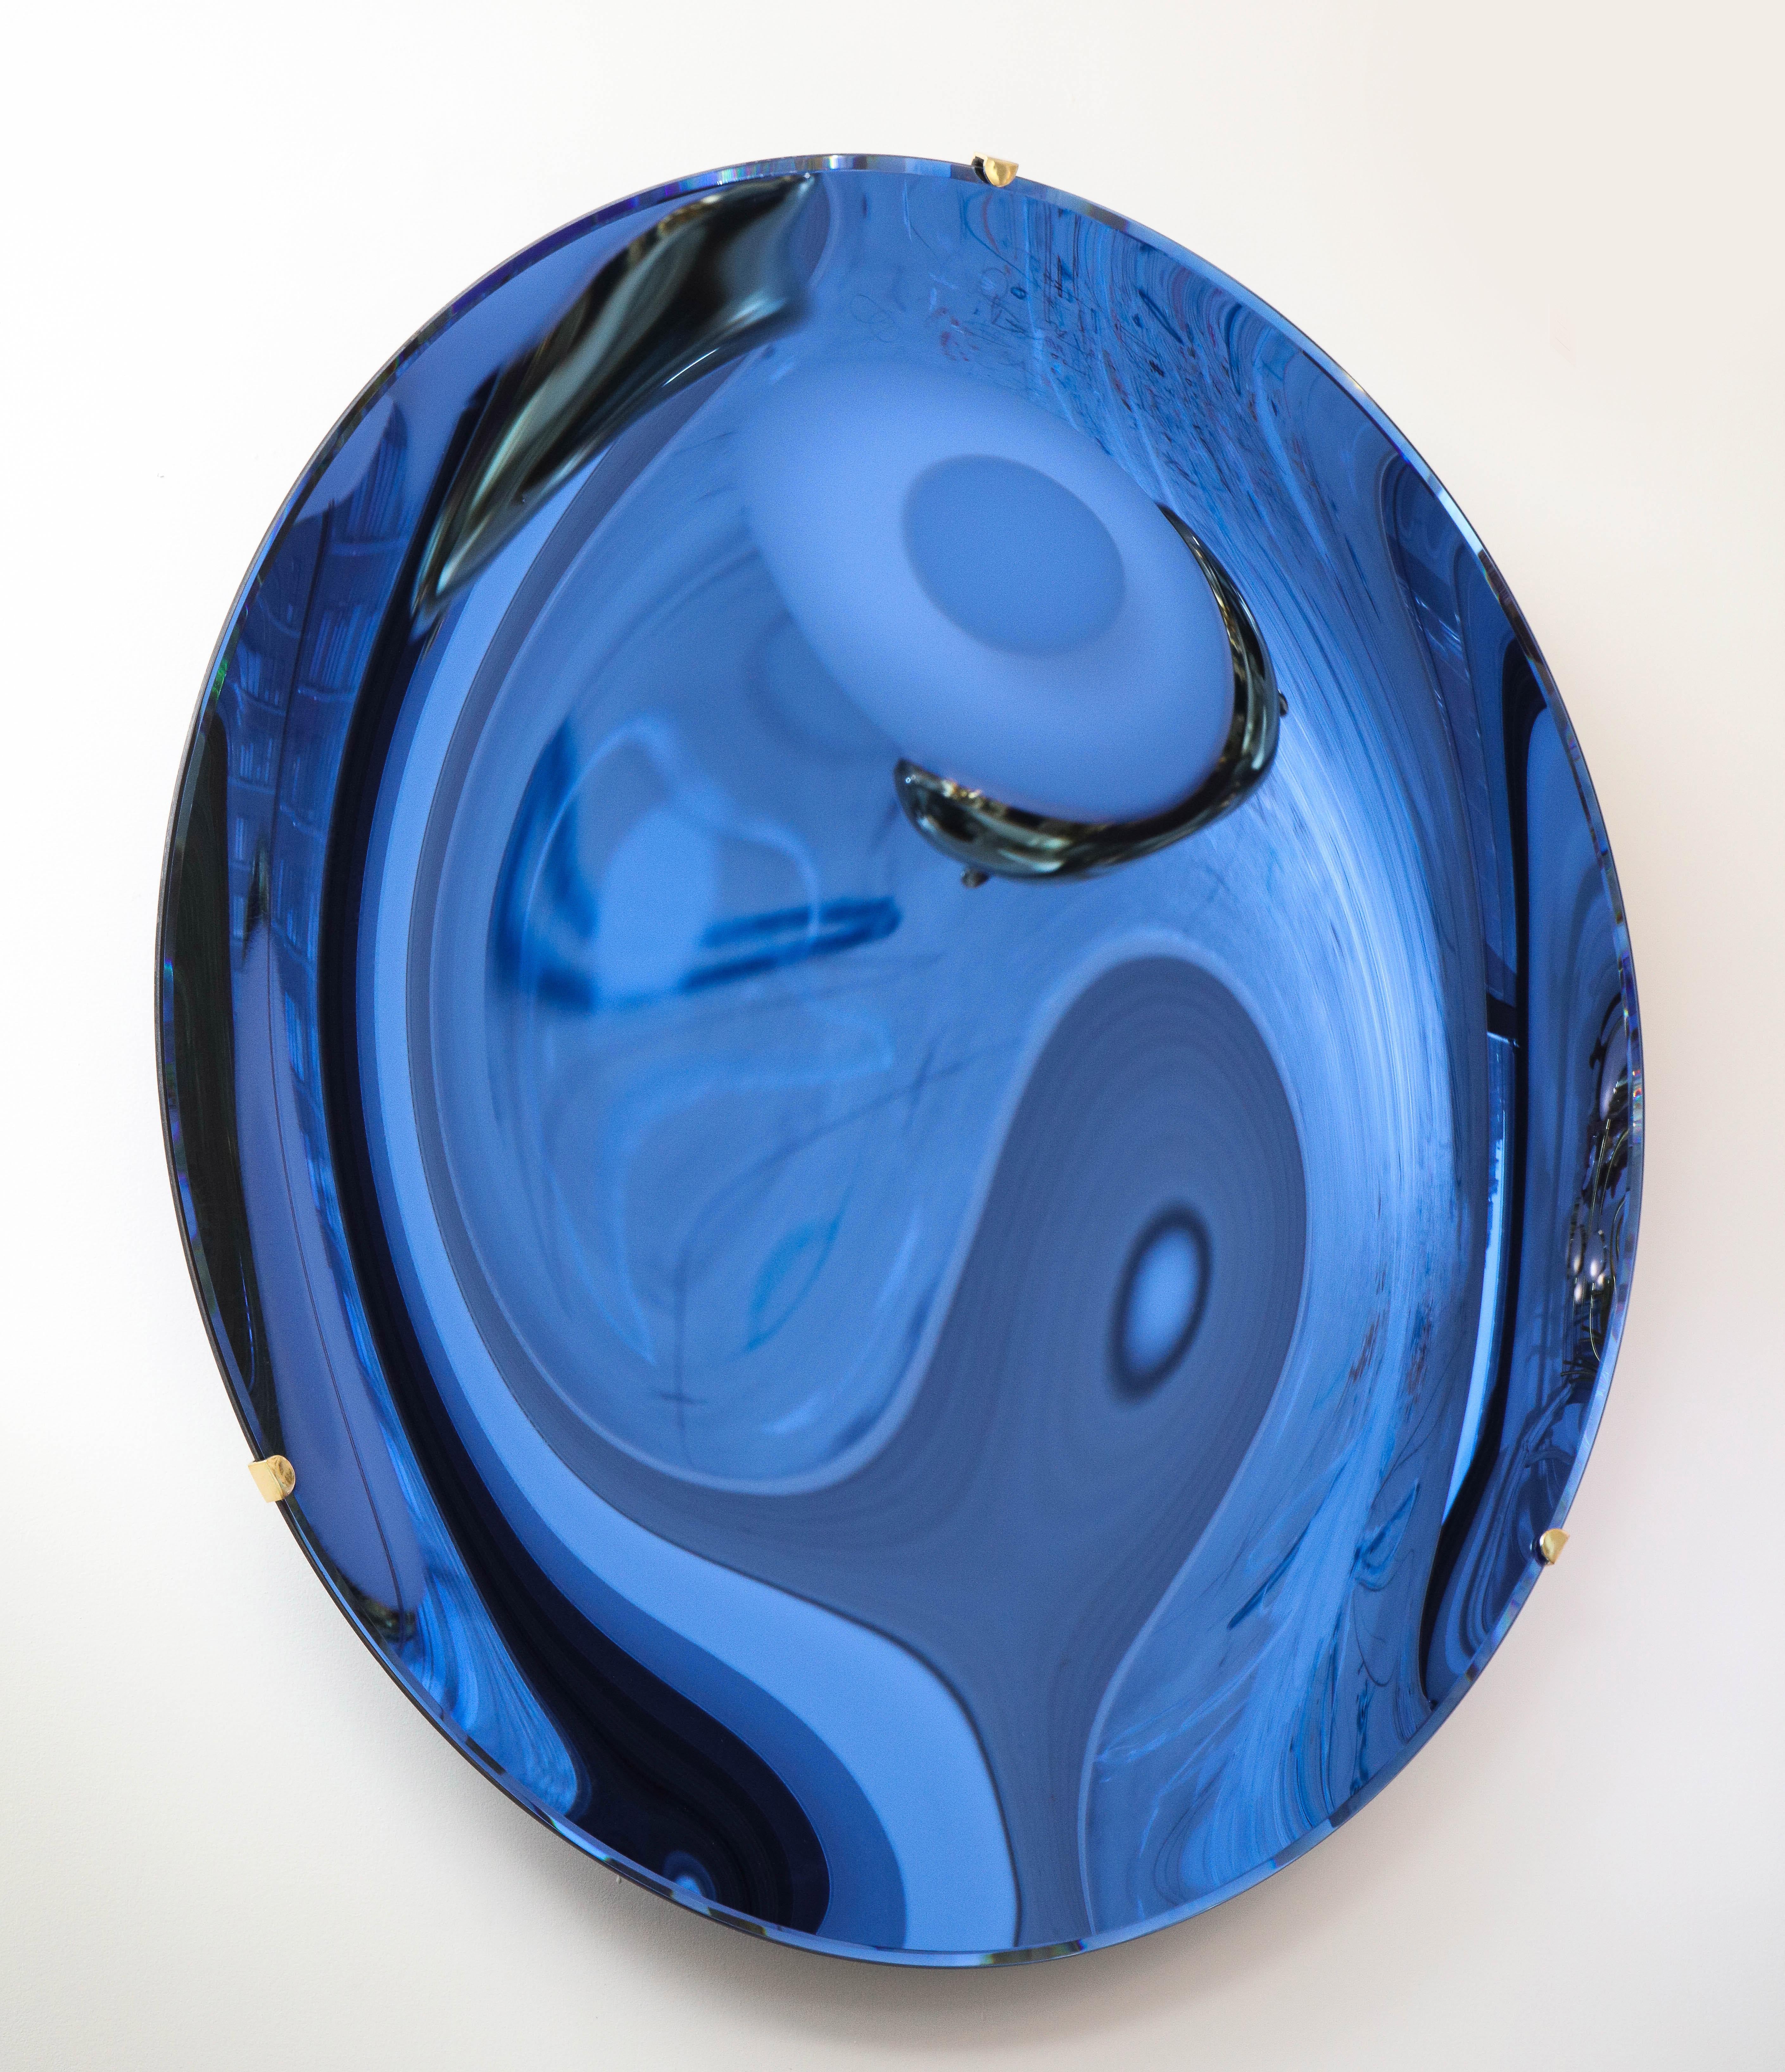 Large round tinted glass in a dramatic cobalt blue hue, thermoformed into a sculptural concave form and mirrored. Mounted on a brass structure that is attached to wall. Hand casted in Milan, Italy, 2021.